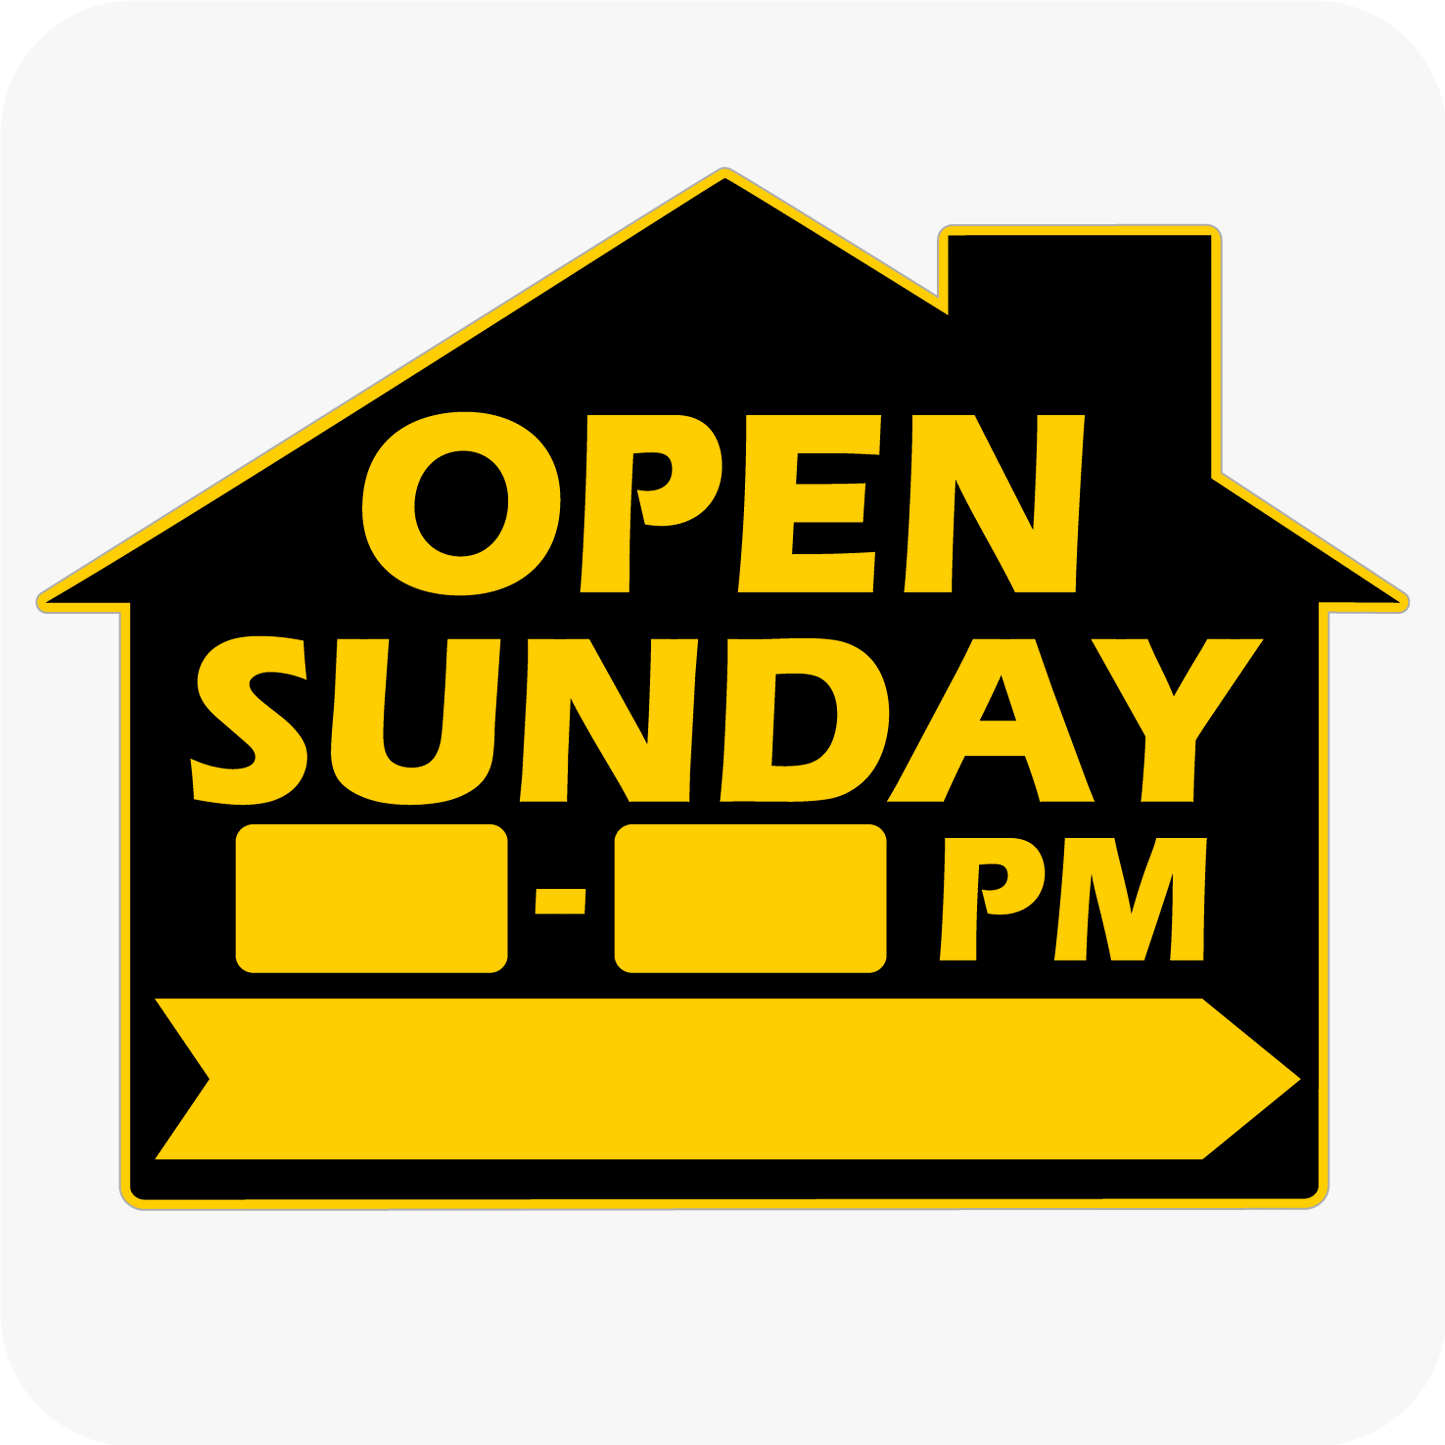 Open Sunday w/ Hours - House Shaped Sign 18 x 24 - Black and Yellow